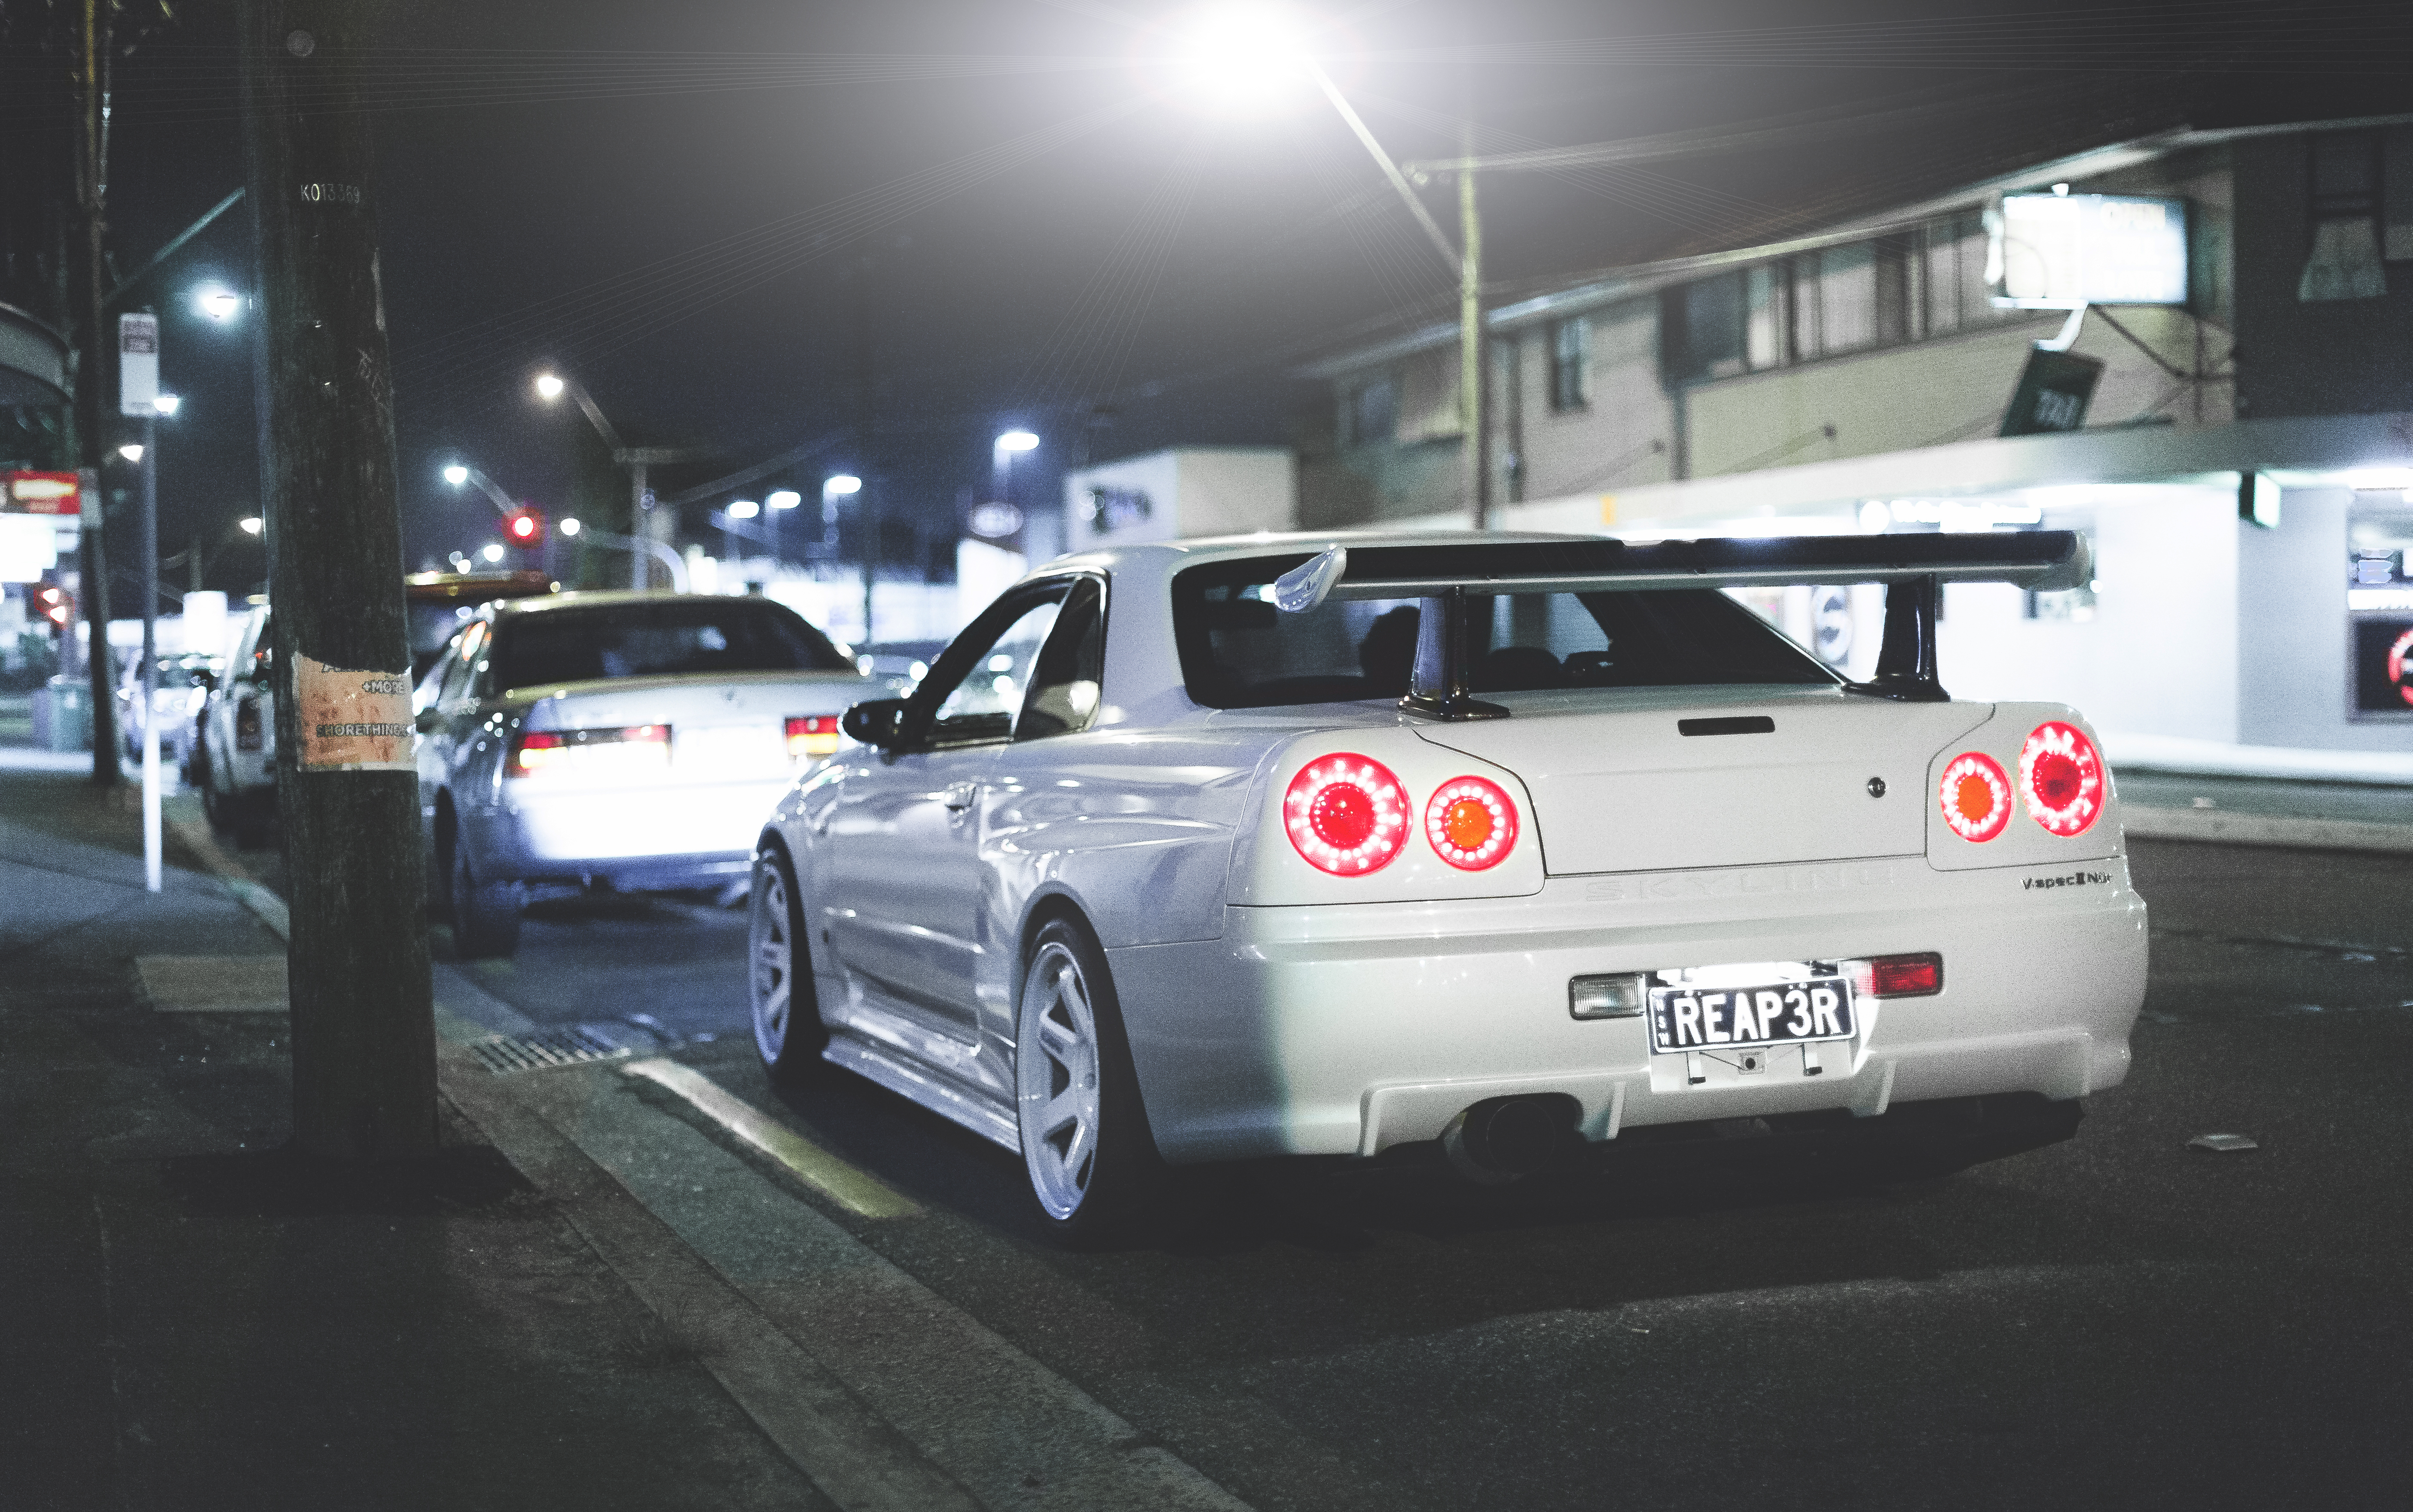 gt-r, back view, skyline, r34 New Lock Screen Backgrounds